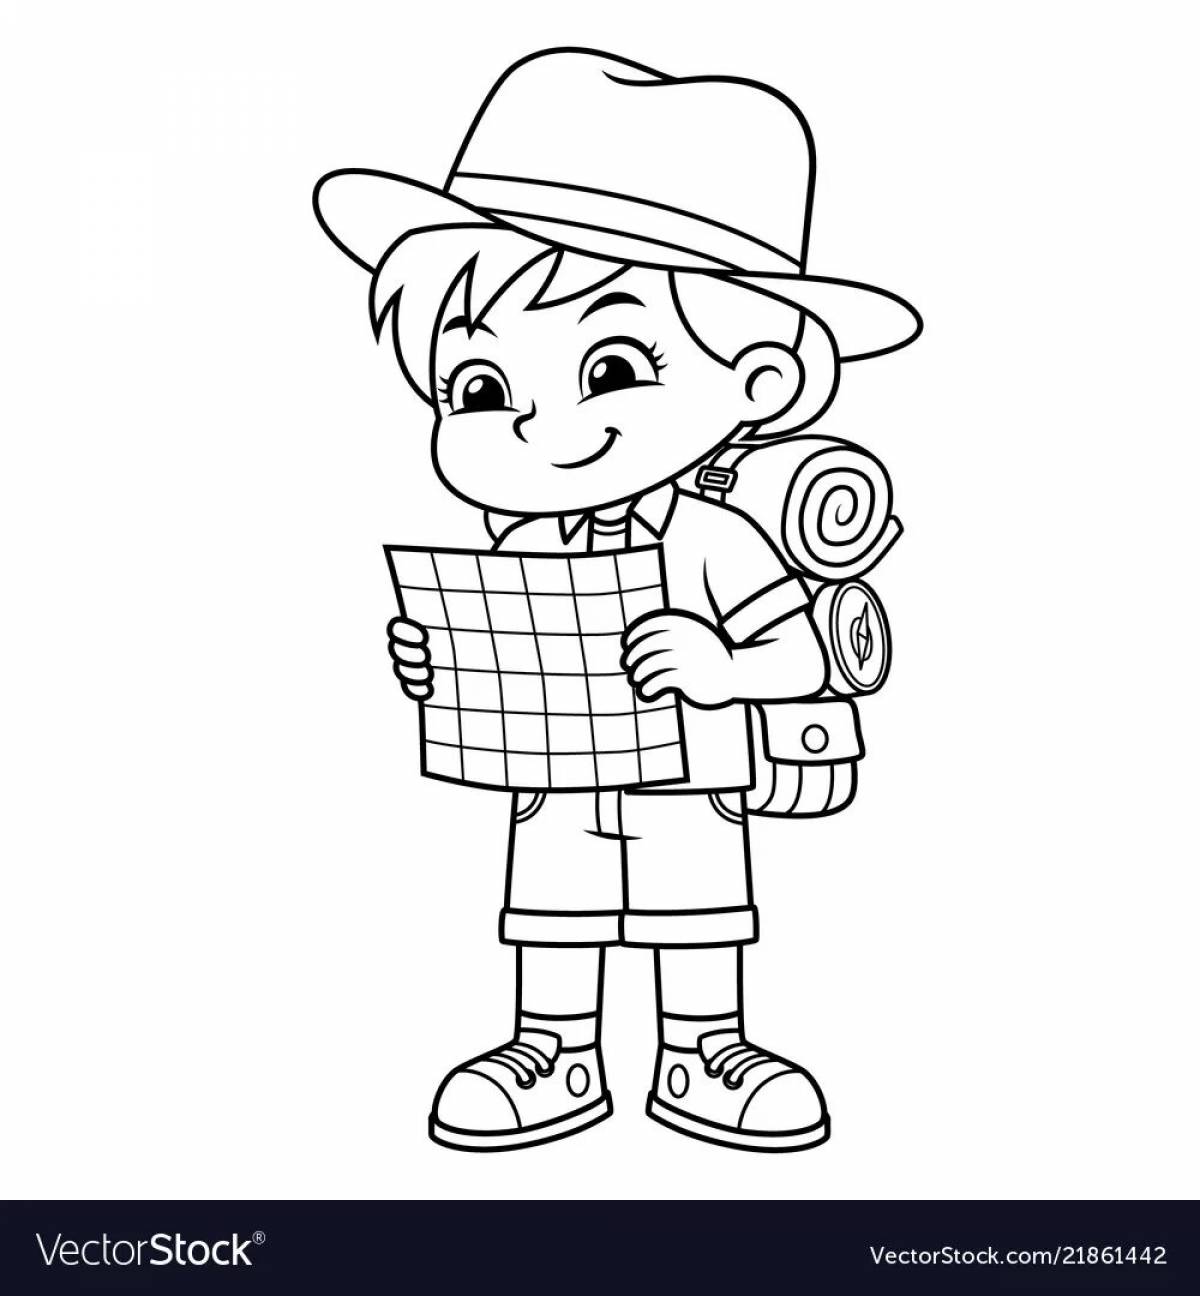 Coloring page witty tourist